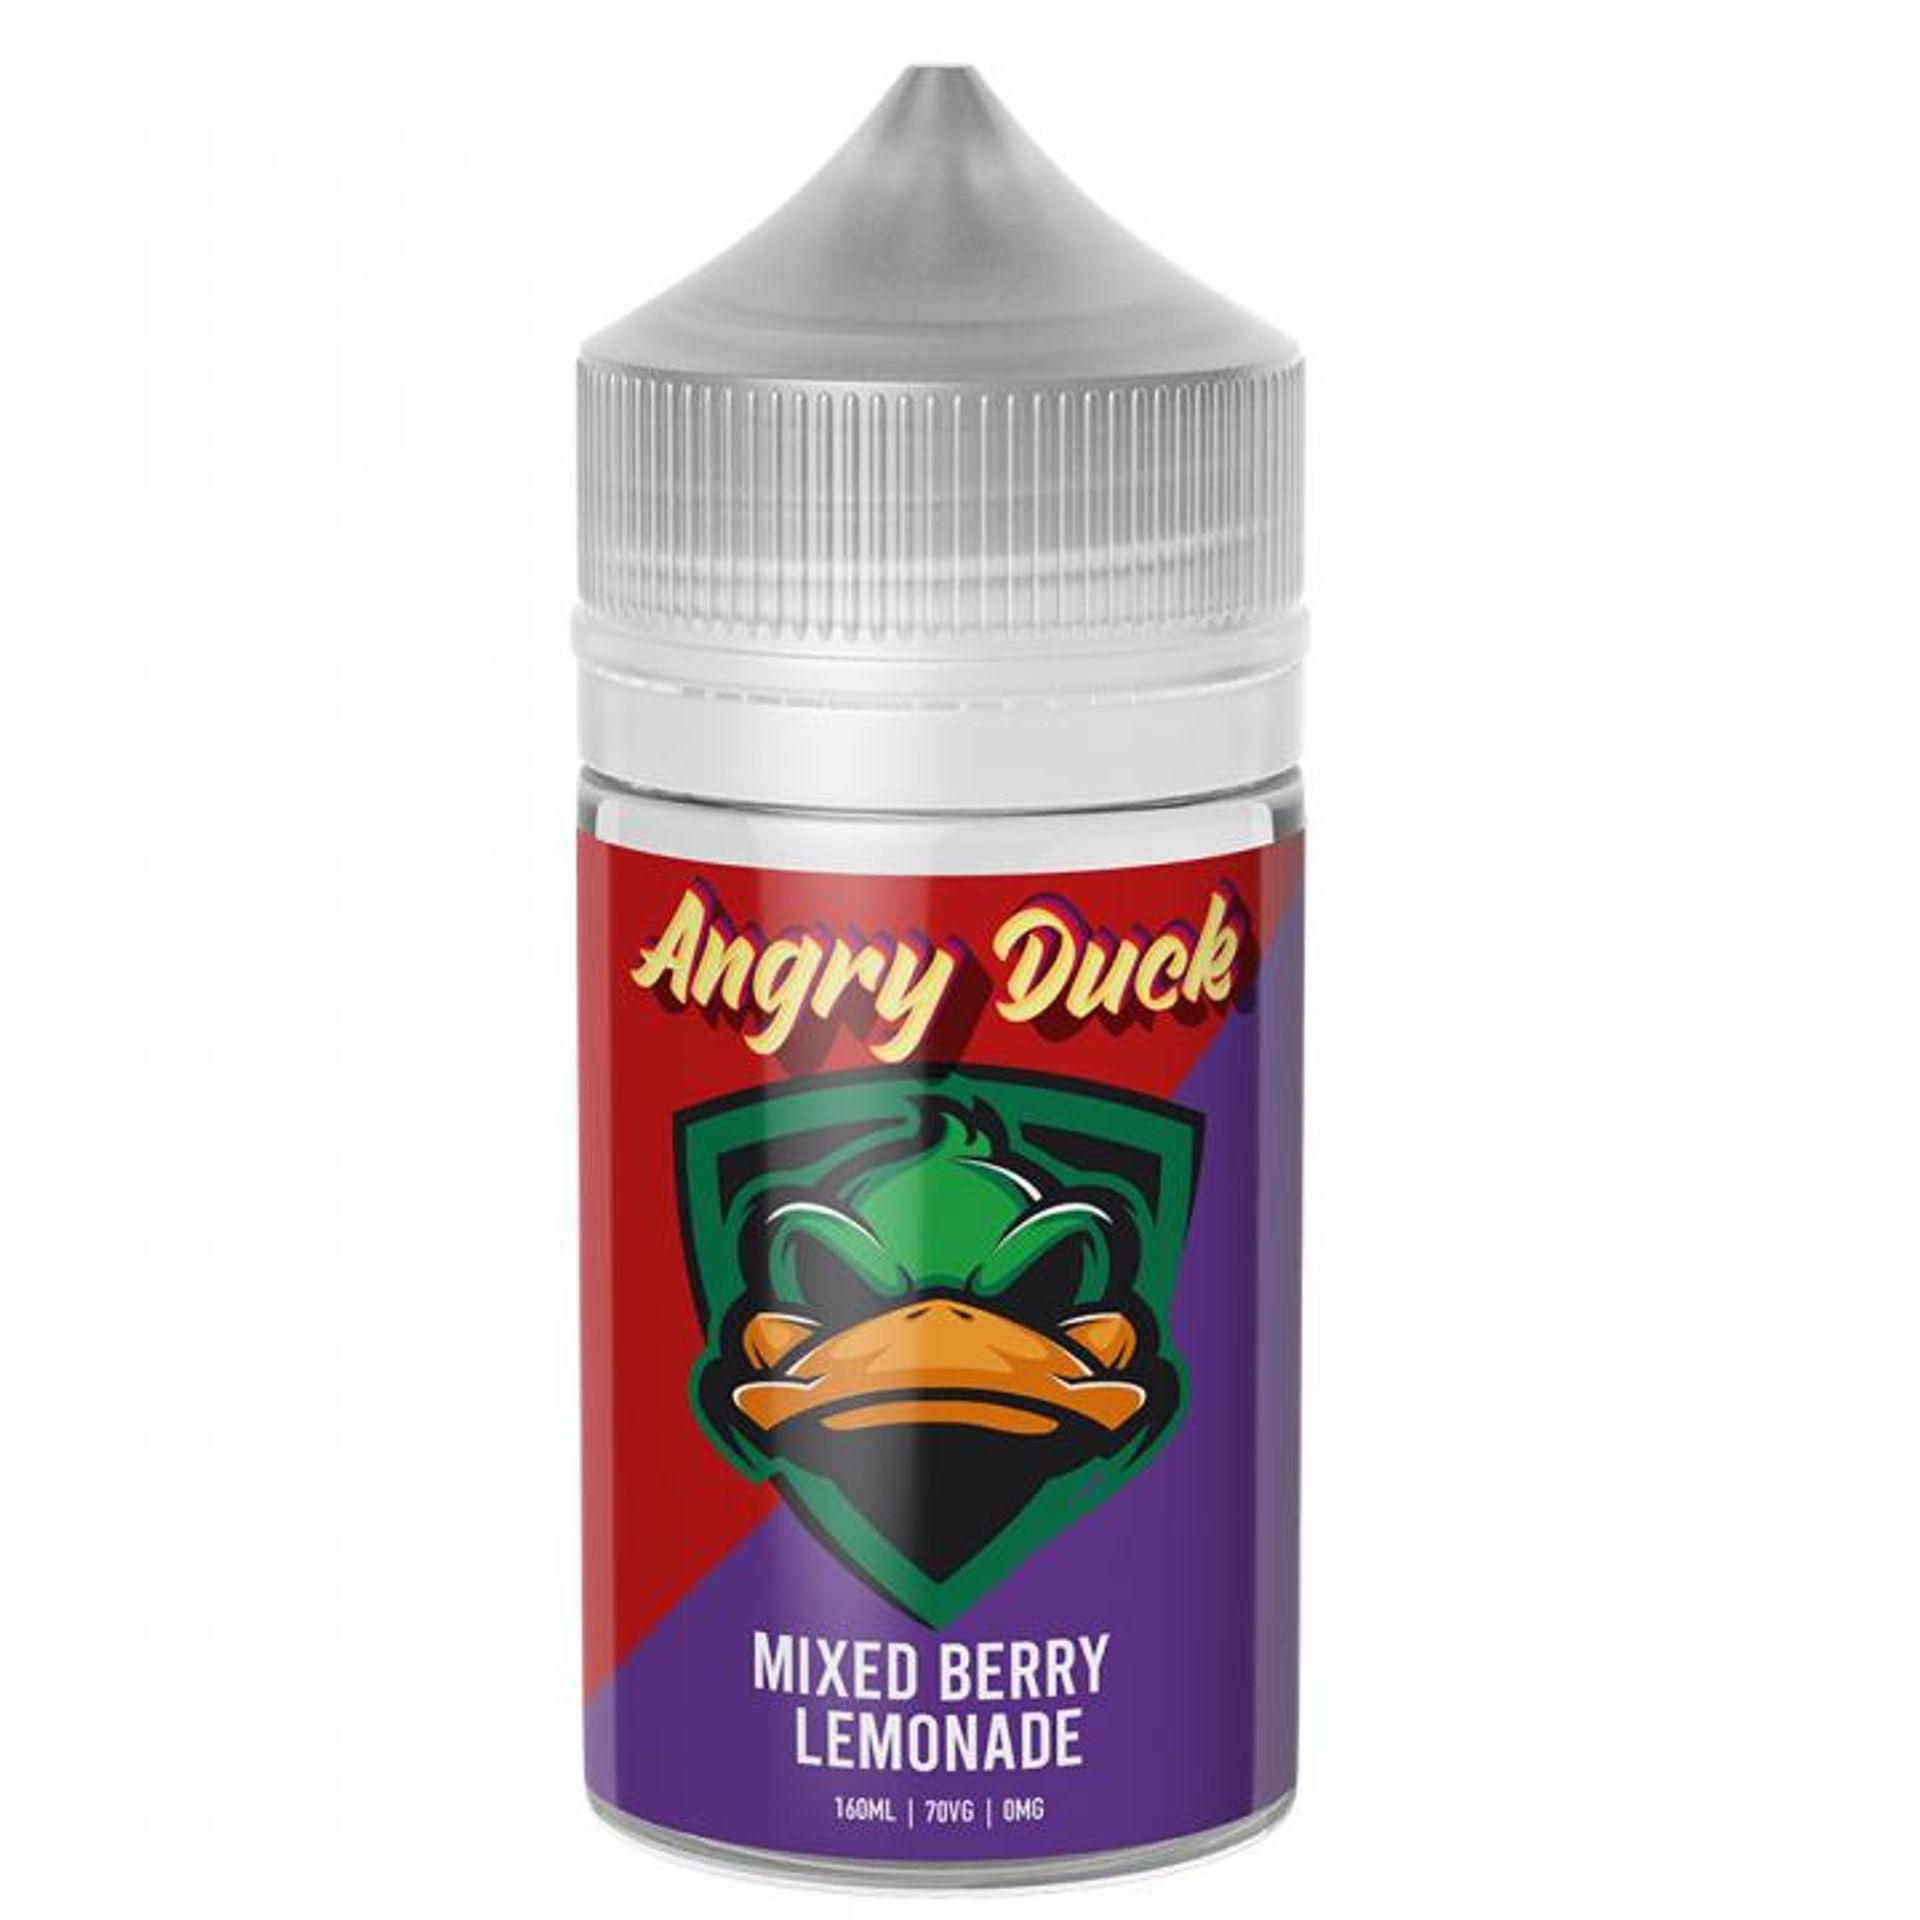 Image of Mixed Berry Lemonade by Angry Duck